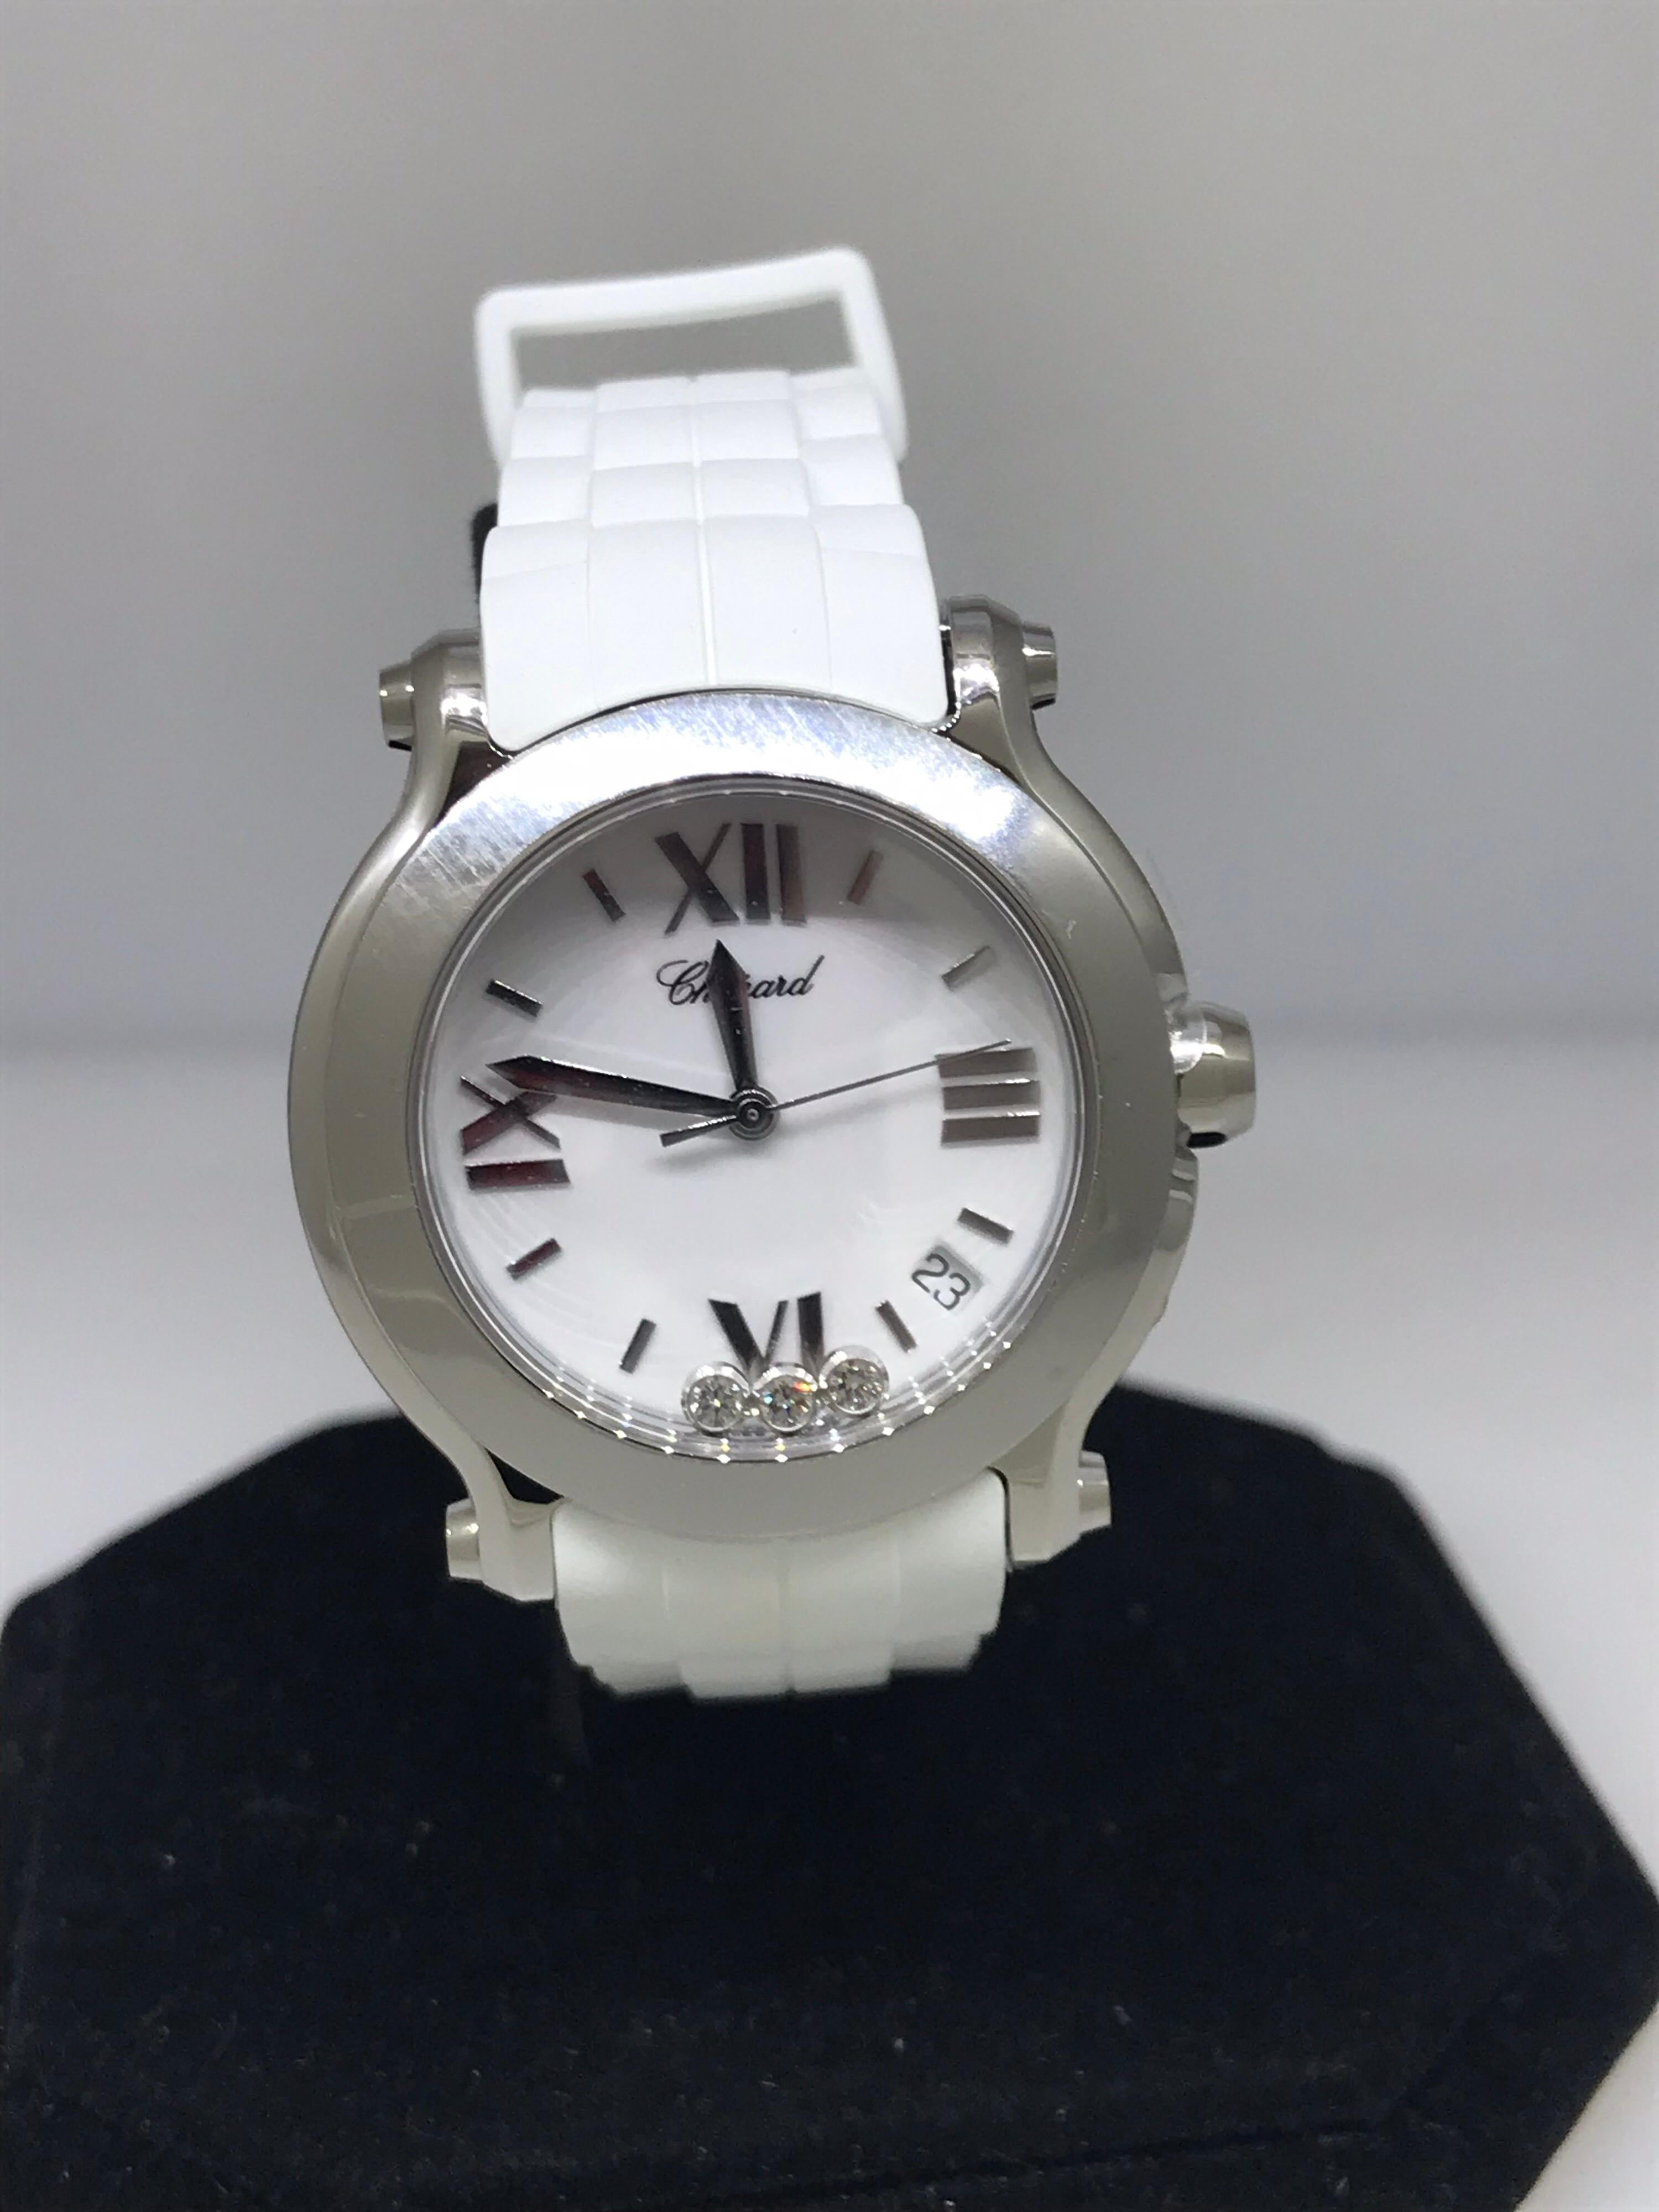 Chopard Happy Sport Ladies Watch

Model Number: 27/8475-3016

100% Authentic

Brand New

Comes with original Chopard Box, Certificate of Authenticity and Warranty and Instruction Manual

Stainless Steel Case & Buckle

White Dial

3 Floating Diamonds